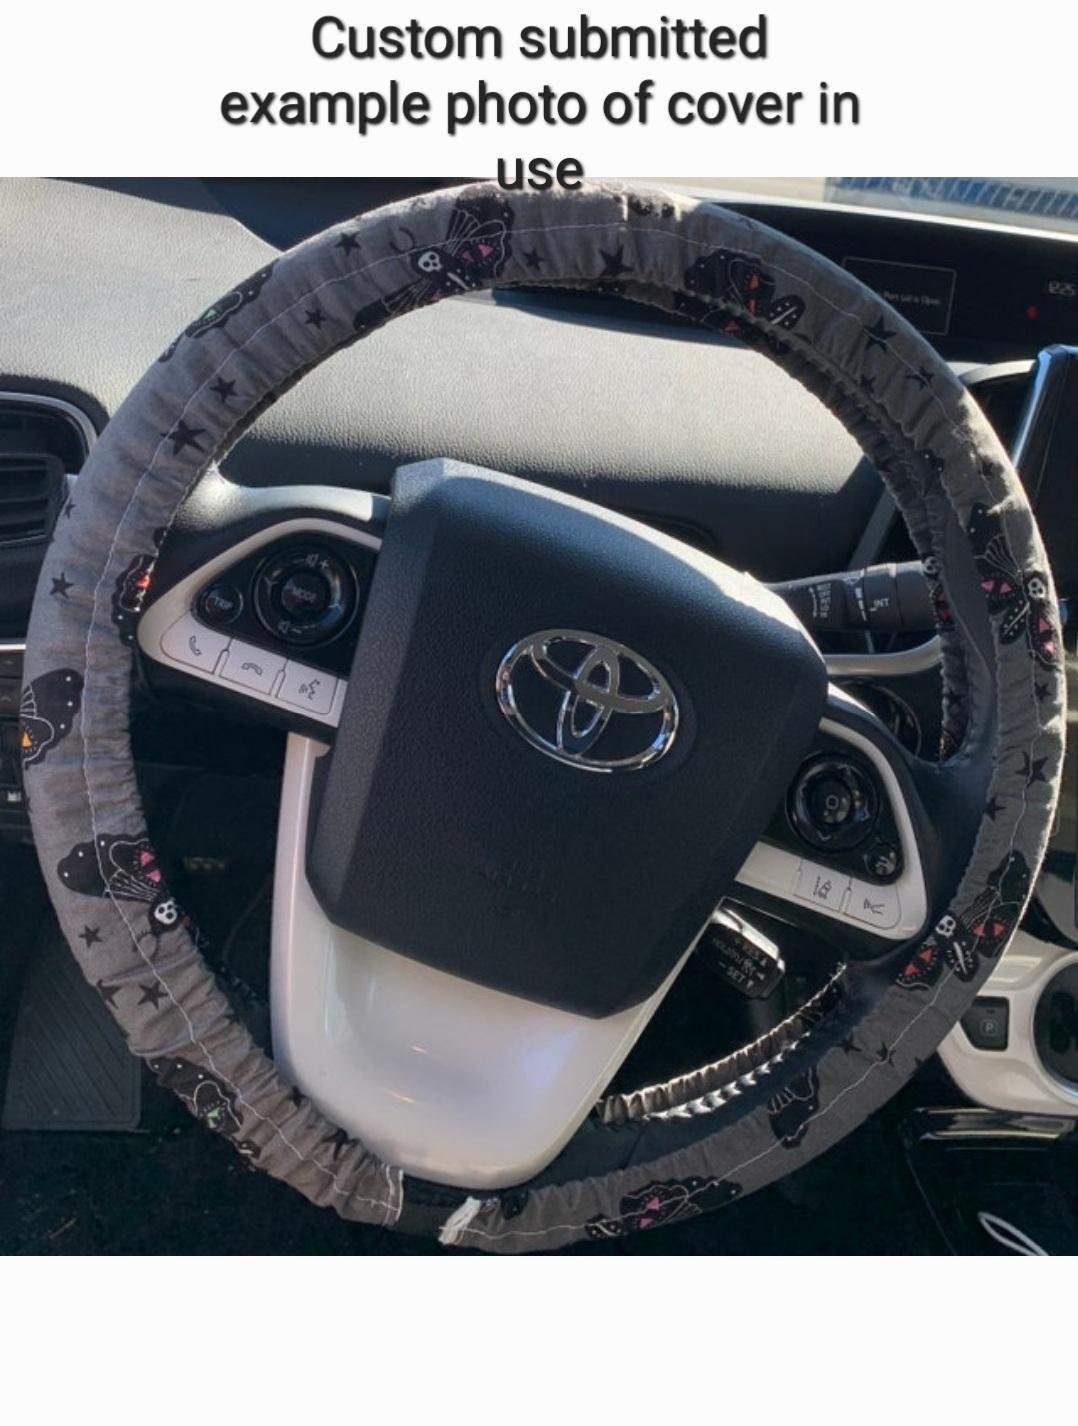 Mouse Steering Wheel Cover made with Licensed Disney Fabric, 100% Cotton, Washable, Custom Car Accessories, Disney Gift - Harlow's Store and Garden Gifts